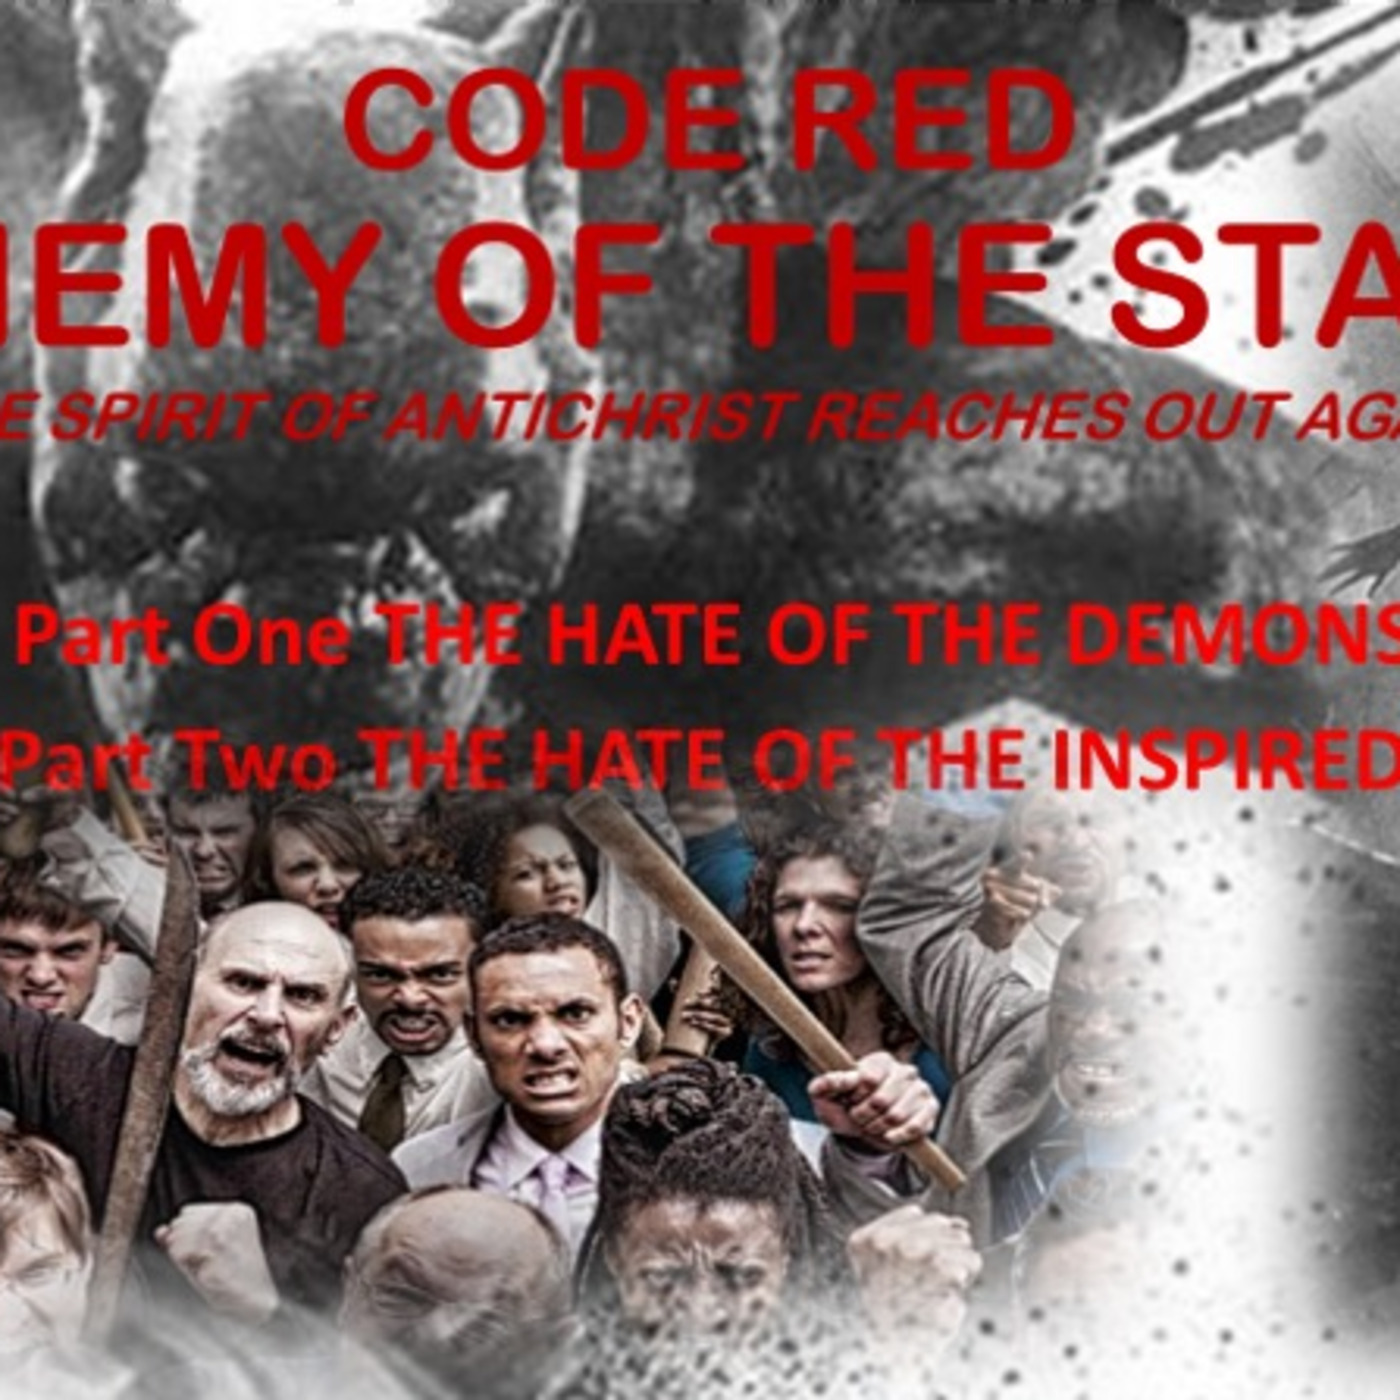 Episode 1634: CODE RED ENEMY OF THE STATE UNNATURAL HATE PART 1